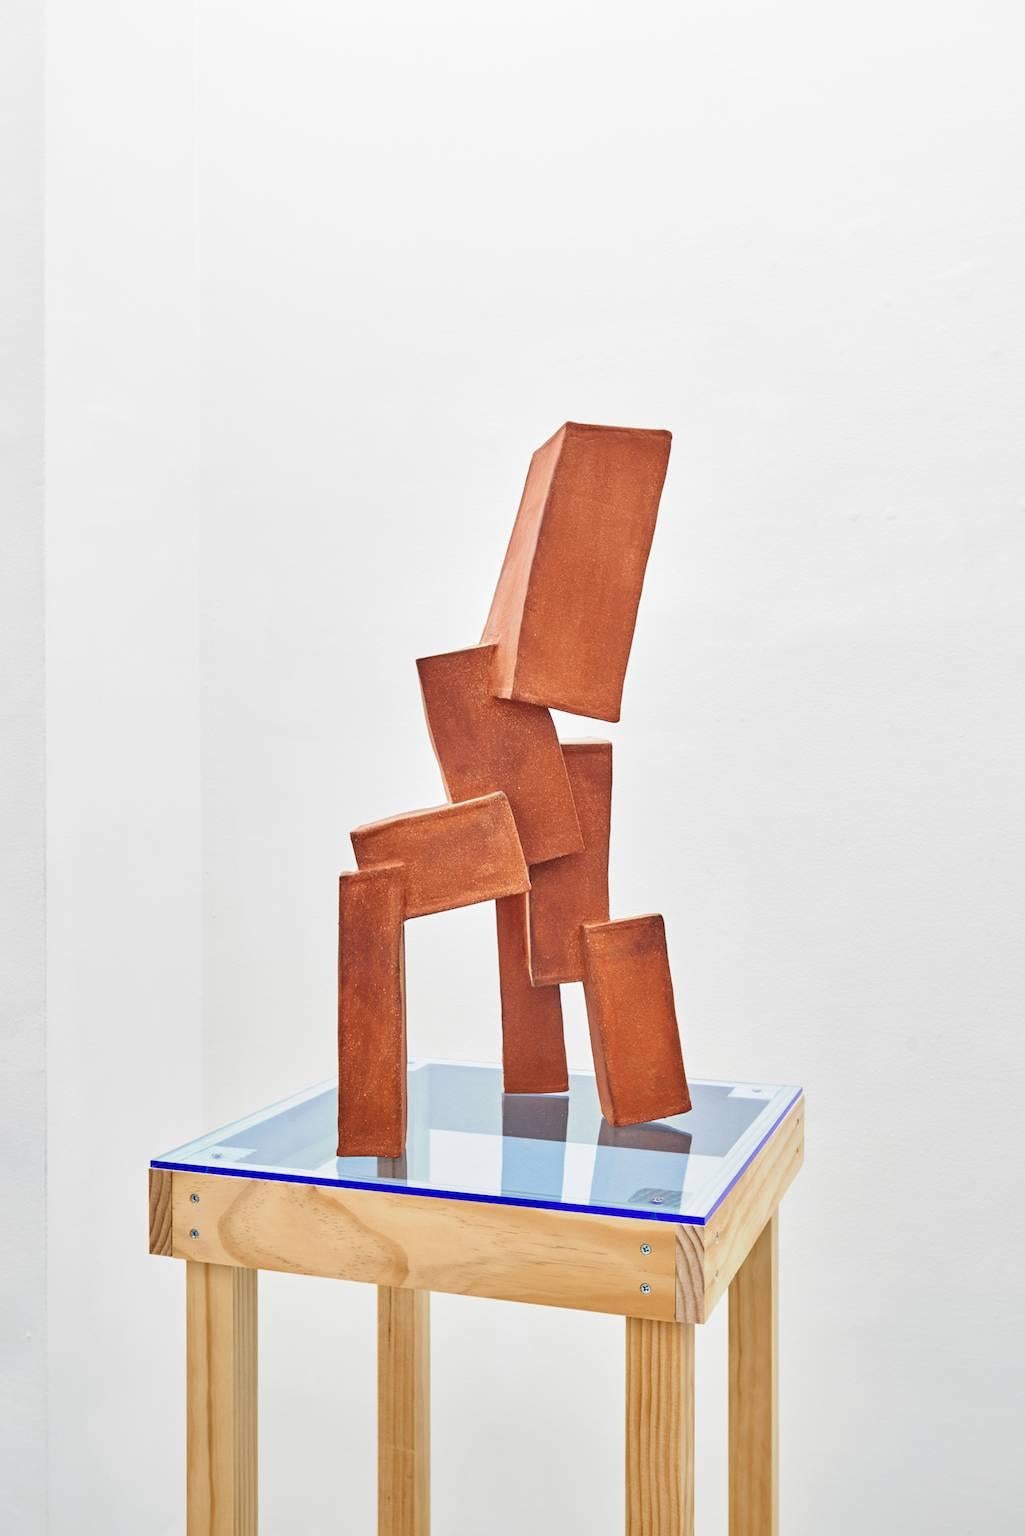 Todd Kelly Abstract Sculpture - Untitled (U.S. #1)